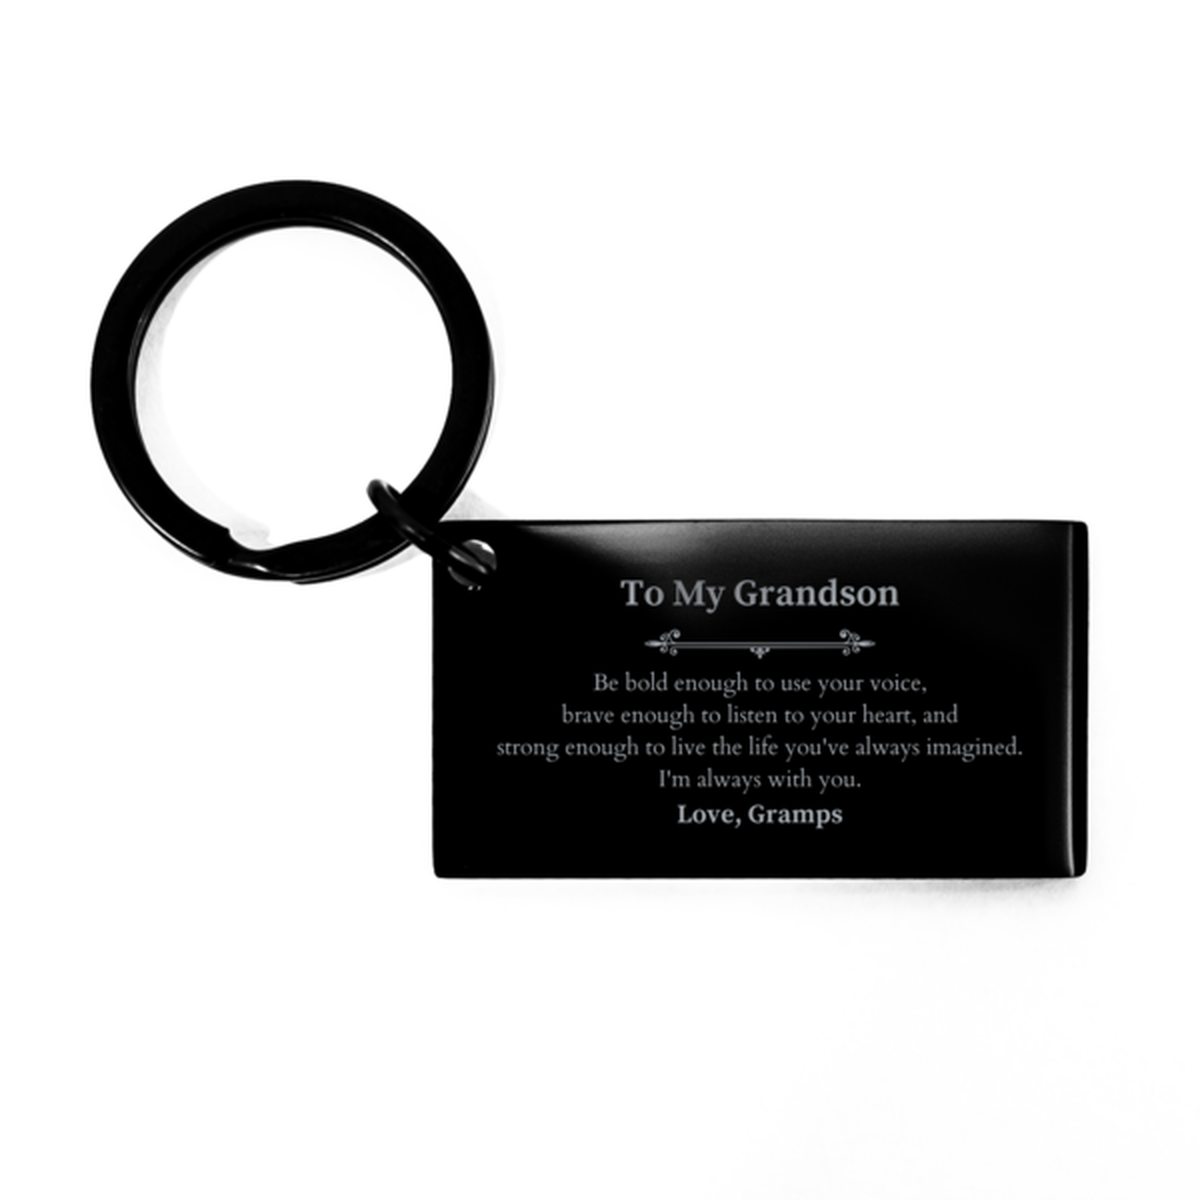 Keepsake Grandson Keychain Gift Idea Graduation Christmas Birthday Grandson from Gramps, Grandson Be bold enough to use your voice, brave enough to listen to your heart. Love, Gramps